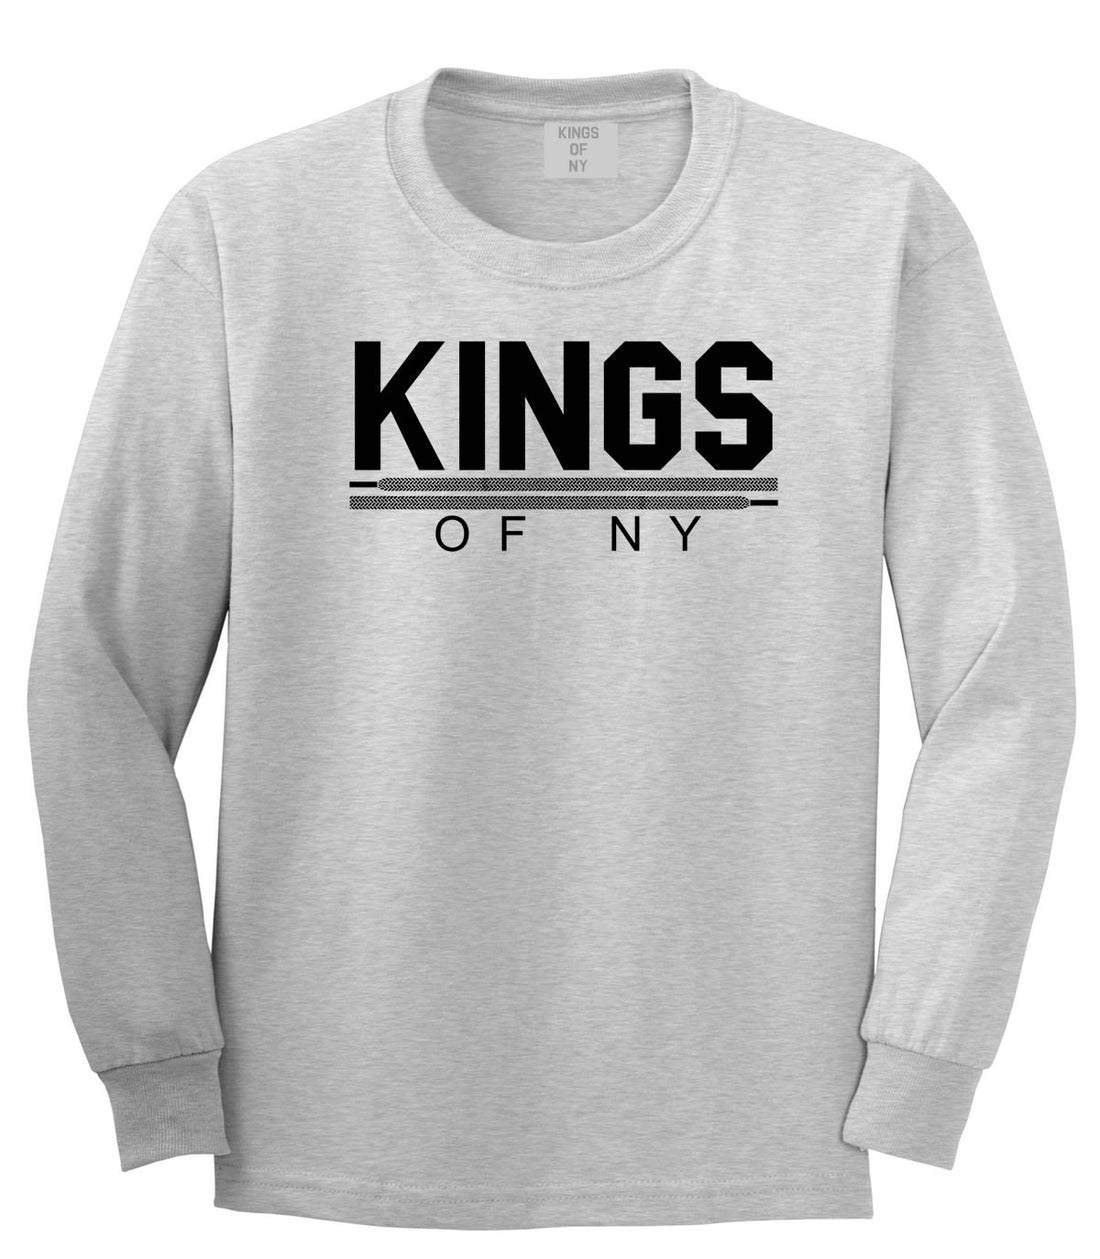 Kings Of NY Laces Long Sleeve T-Shirt in Grey By Kings Of NY